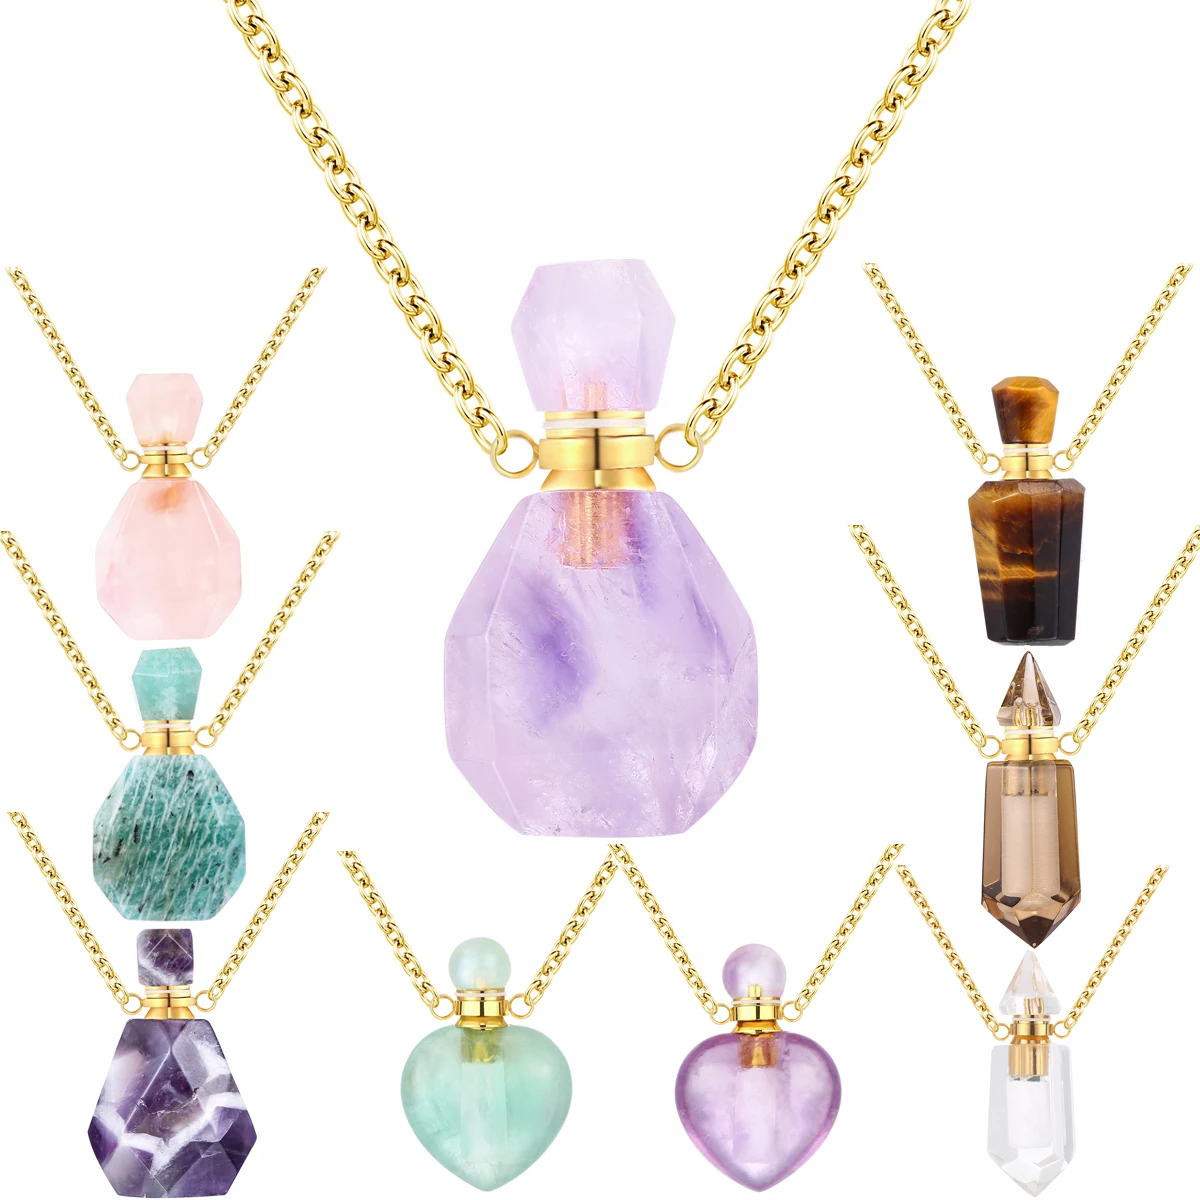 

quartz stone healing accessories essential oil bottle aromatherapy vial perfume real natural crystal necklace, Different color is available